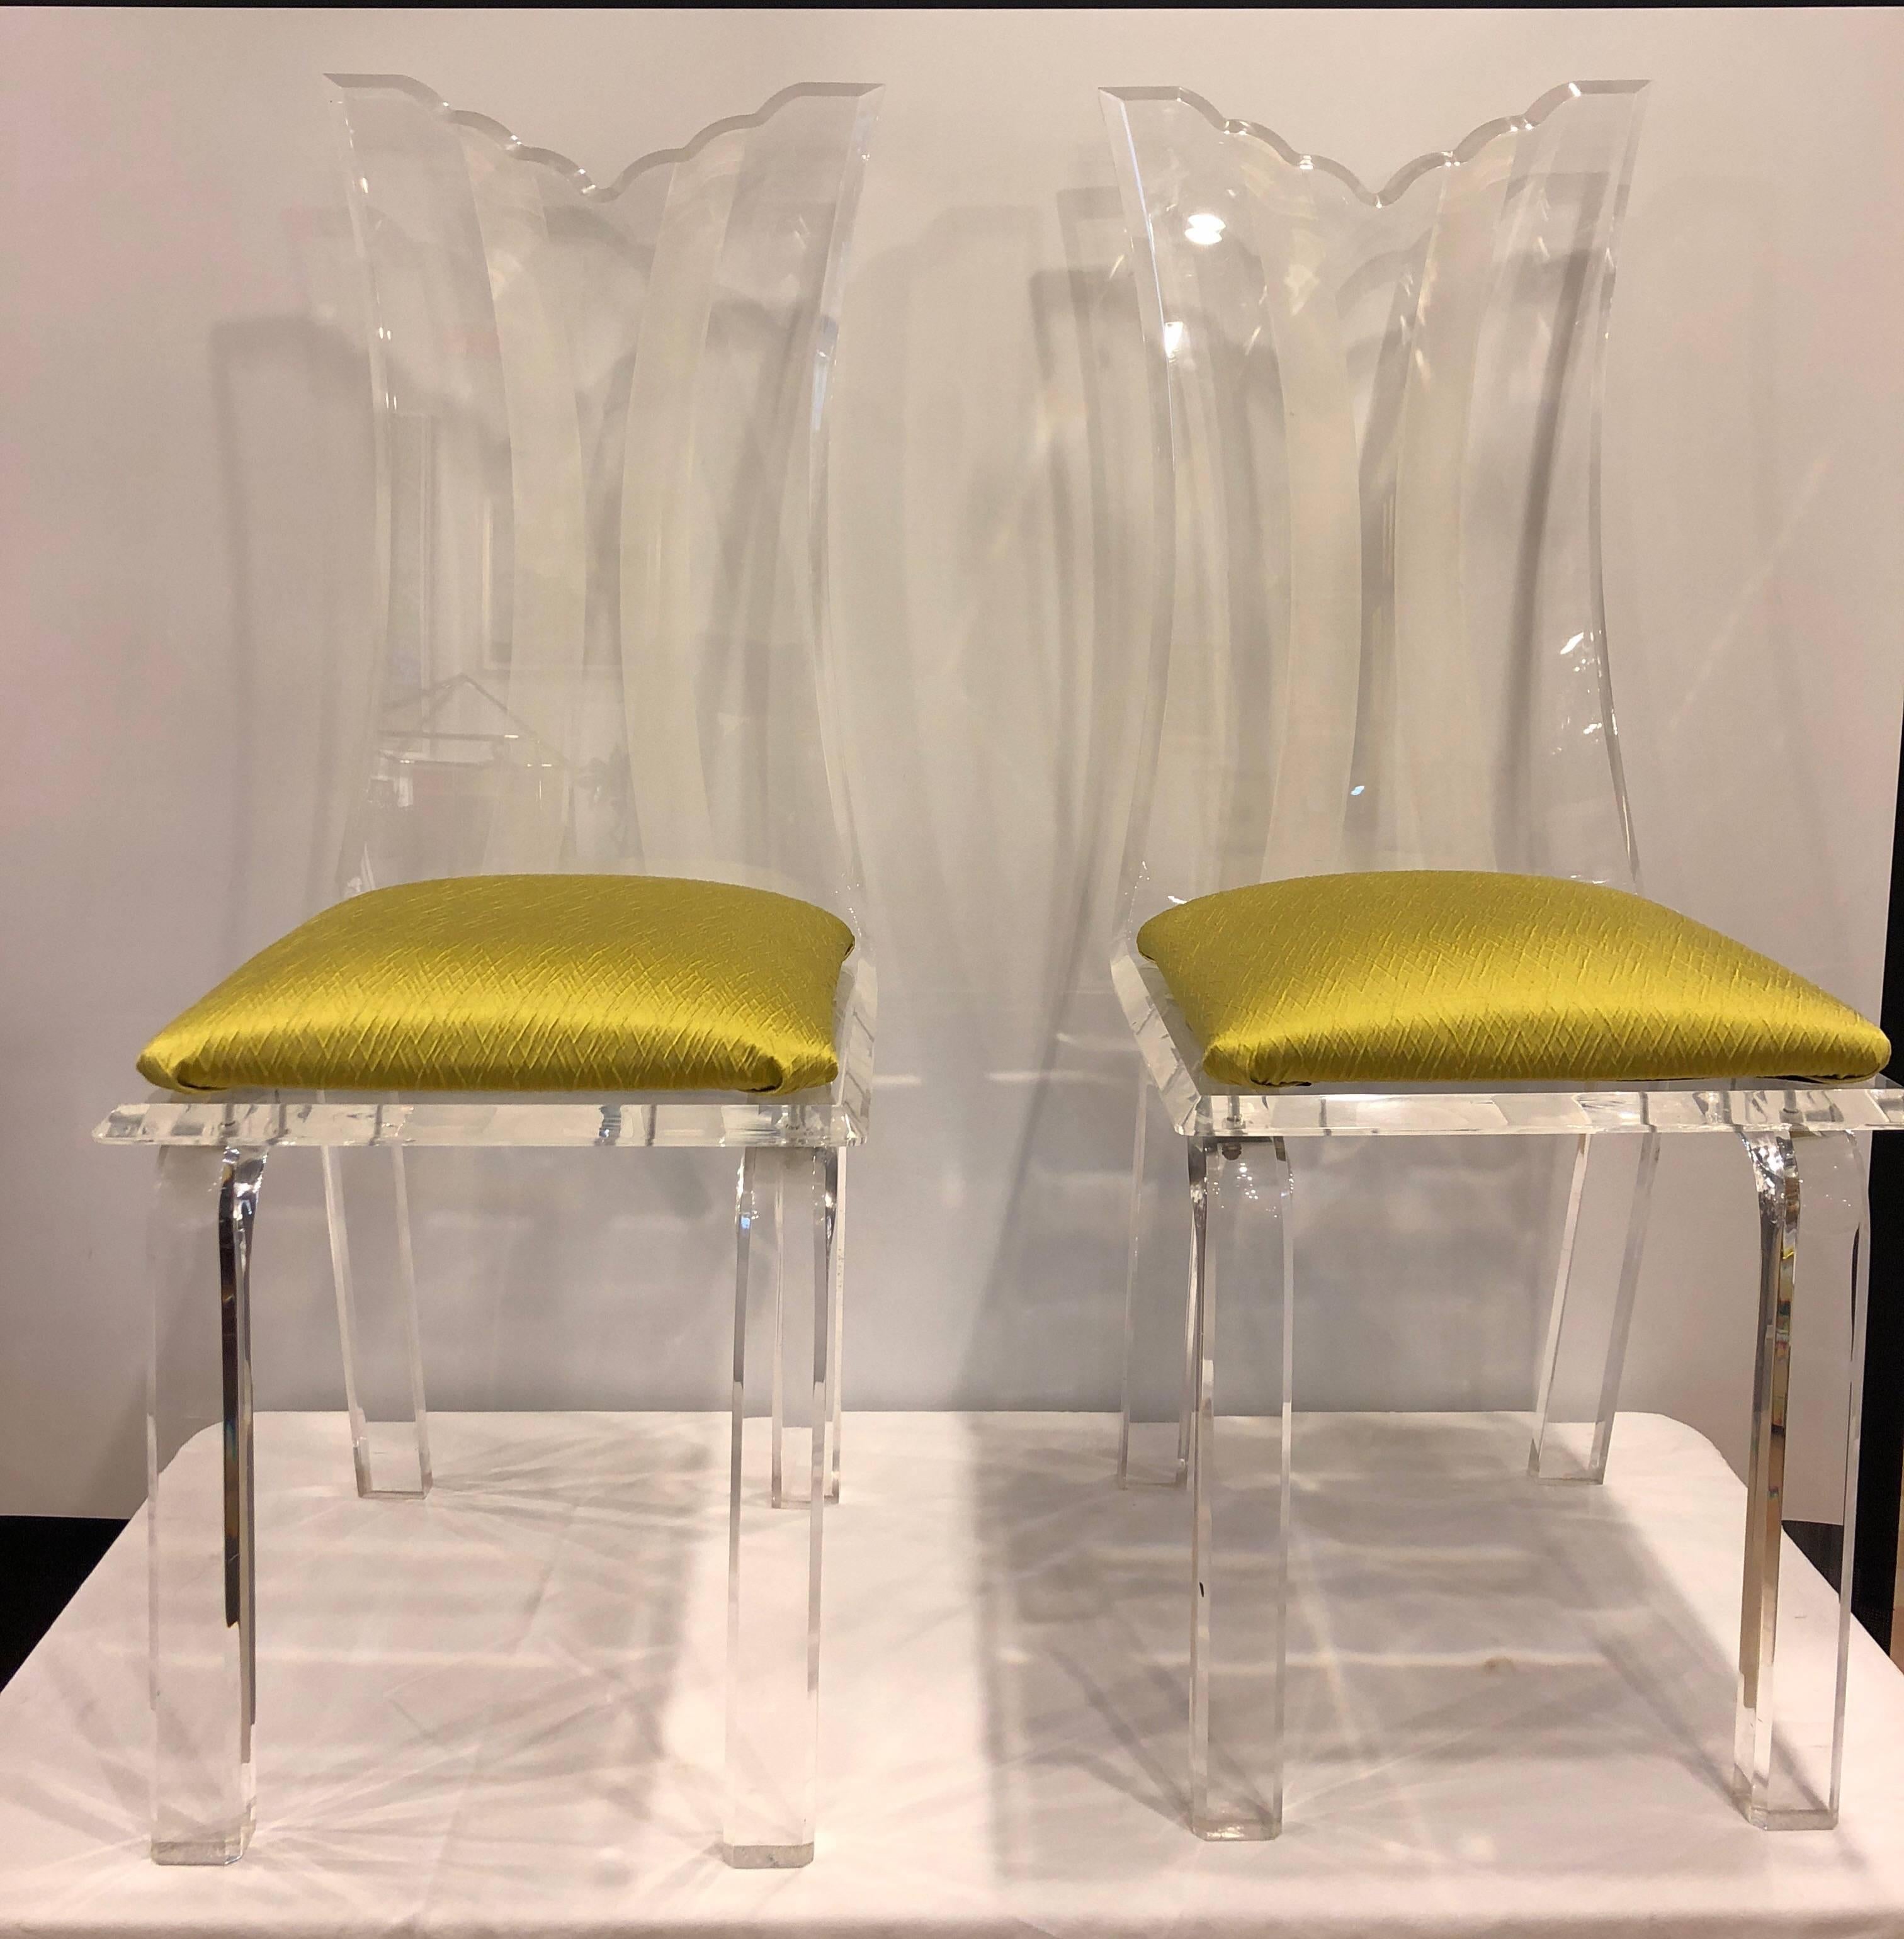 Pair of fabulous vintage, 1960s Lucite chairs covered in a Chartreuse green fabric. Can easily be recovered. Frosted designs in the frames.